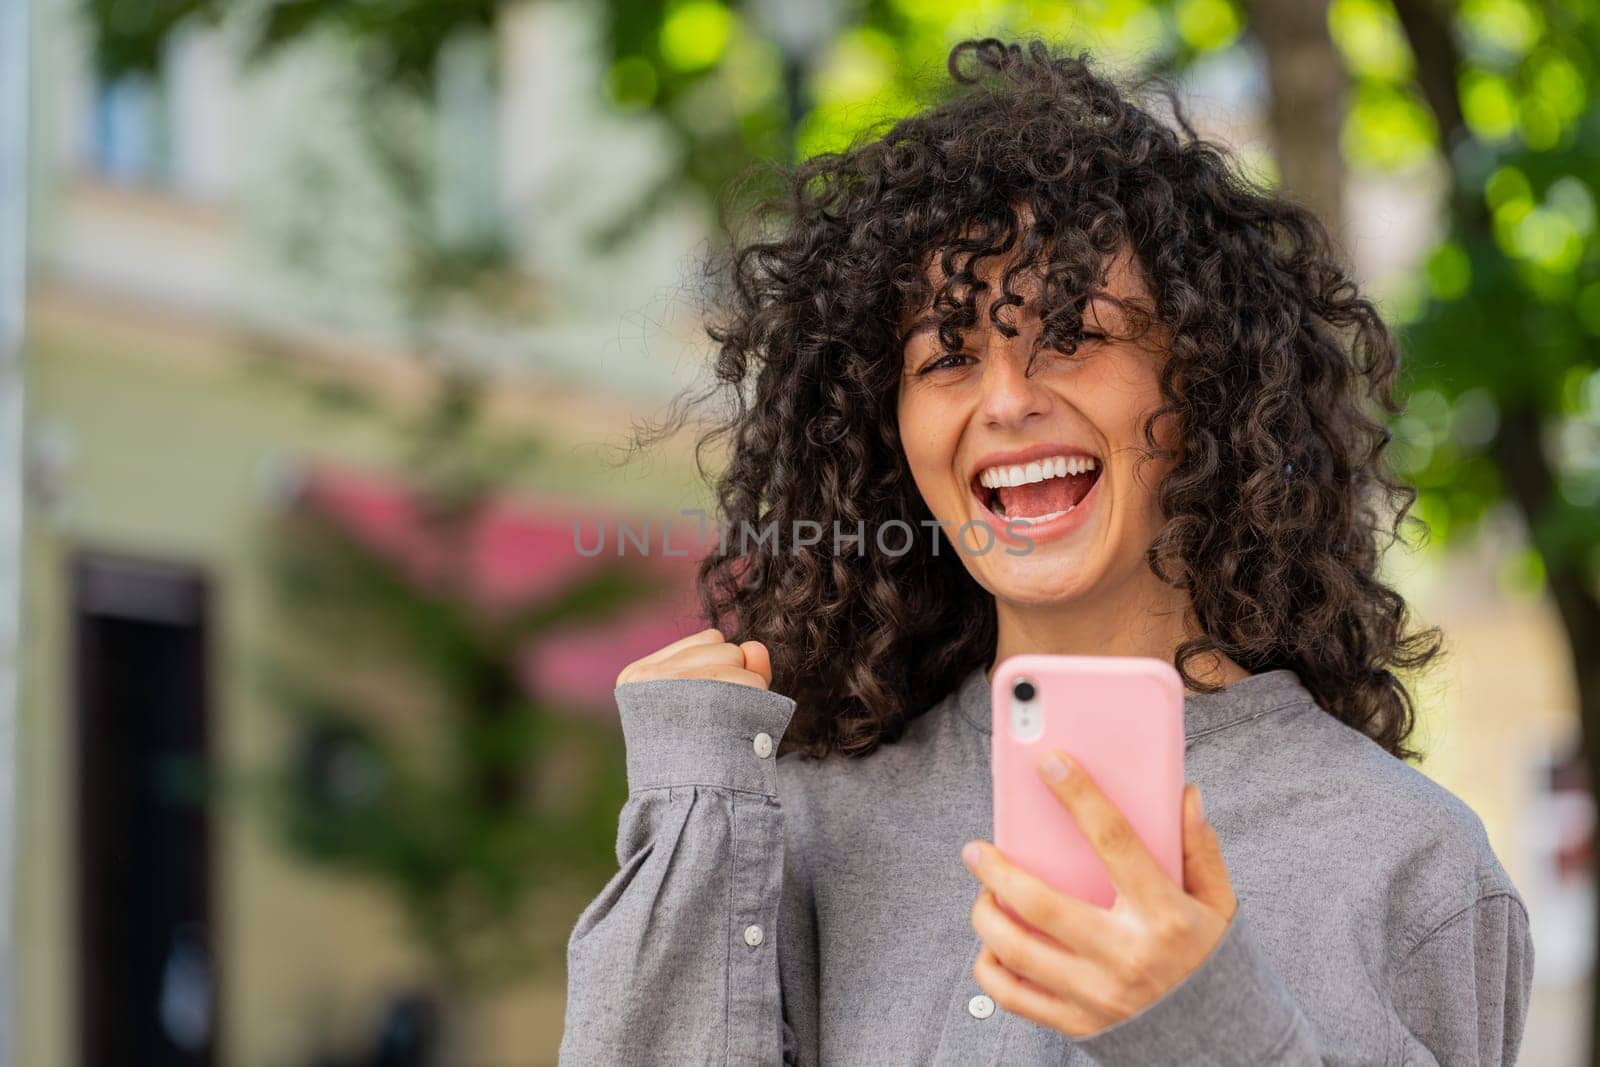 Caucasian young woman use mobile smartphone celebrating win good message news, lottery casino jackpot victory, giveaway online outdoors. Lady girl on urban city street. Town lifestyles. Sunny park